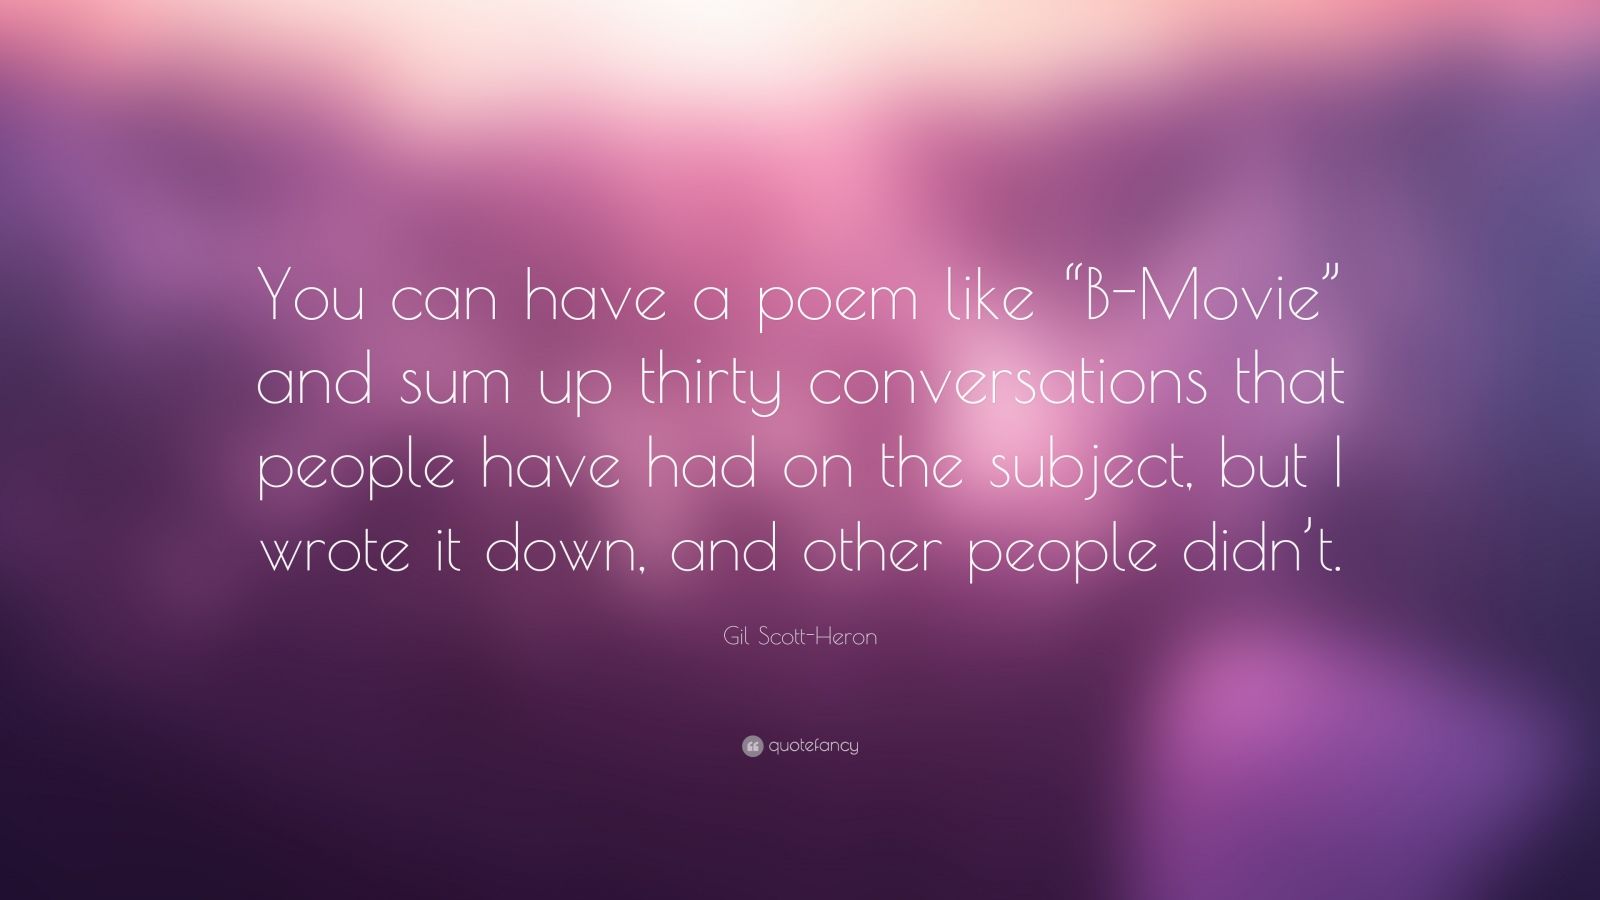 Gil Scott Heron Quote: You can have a poem like B Movie and sum up